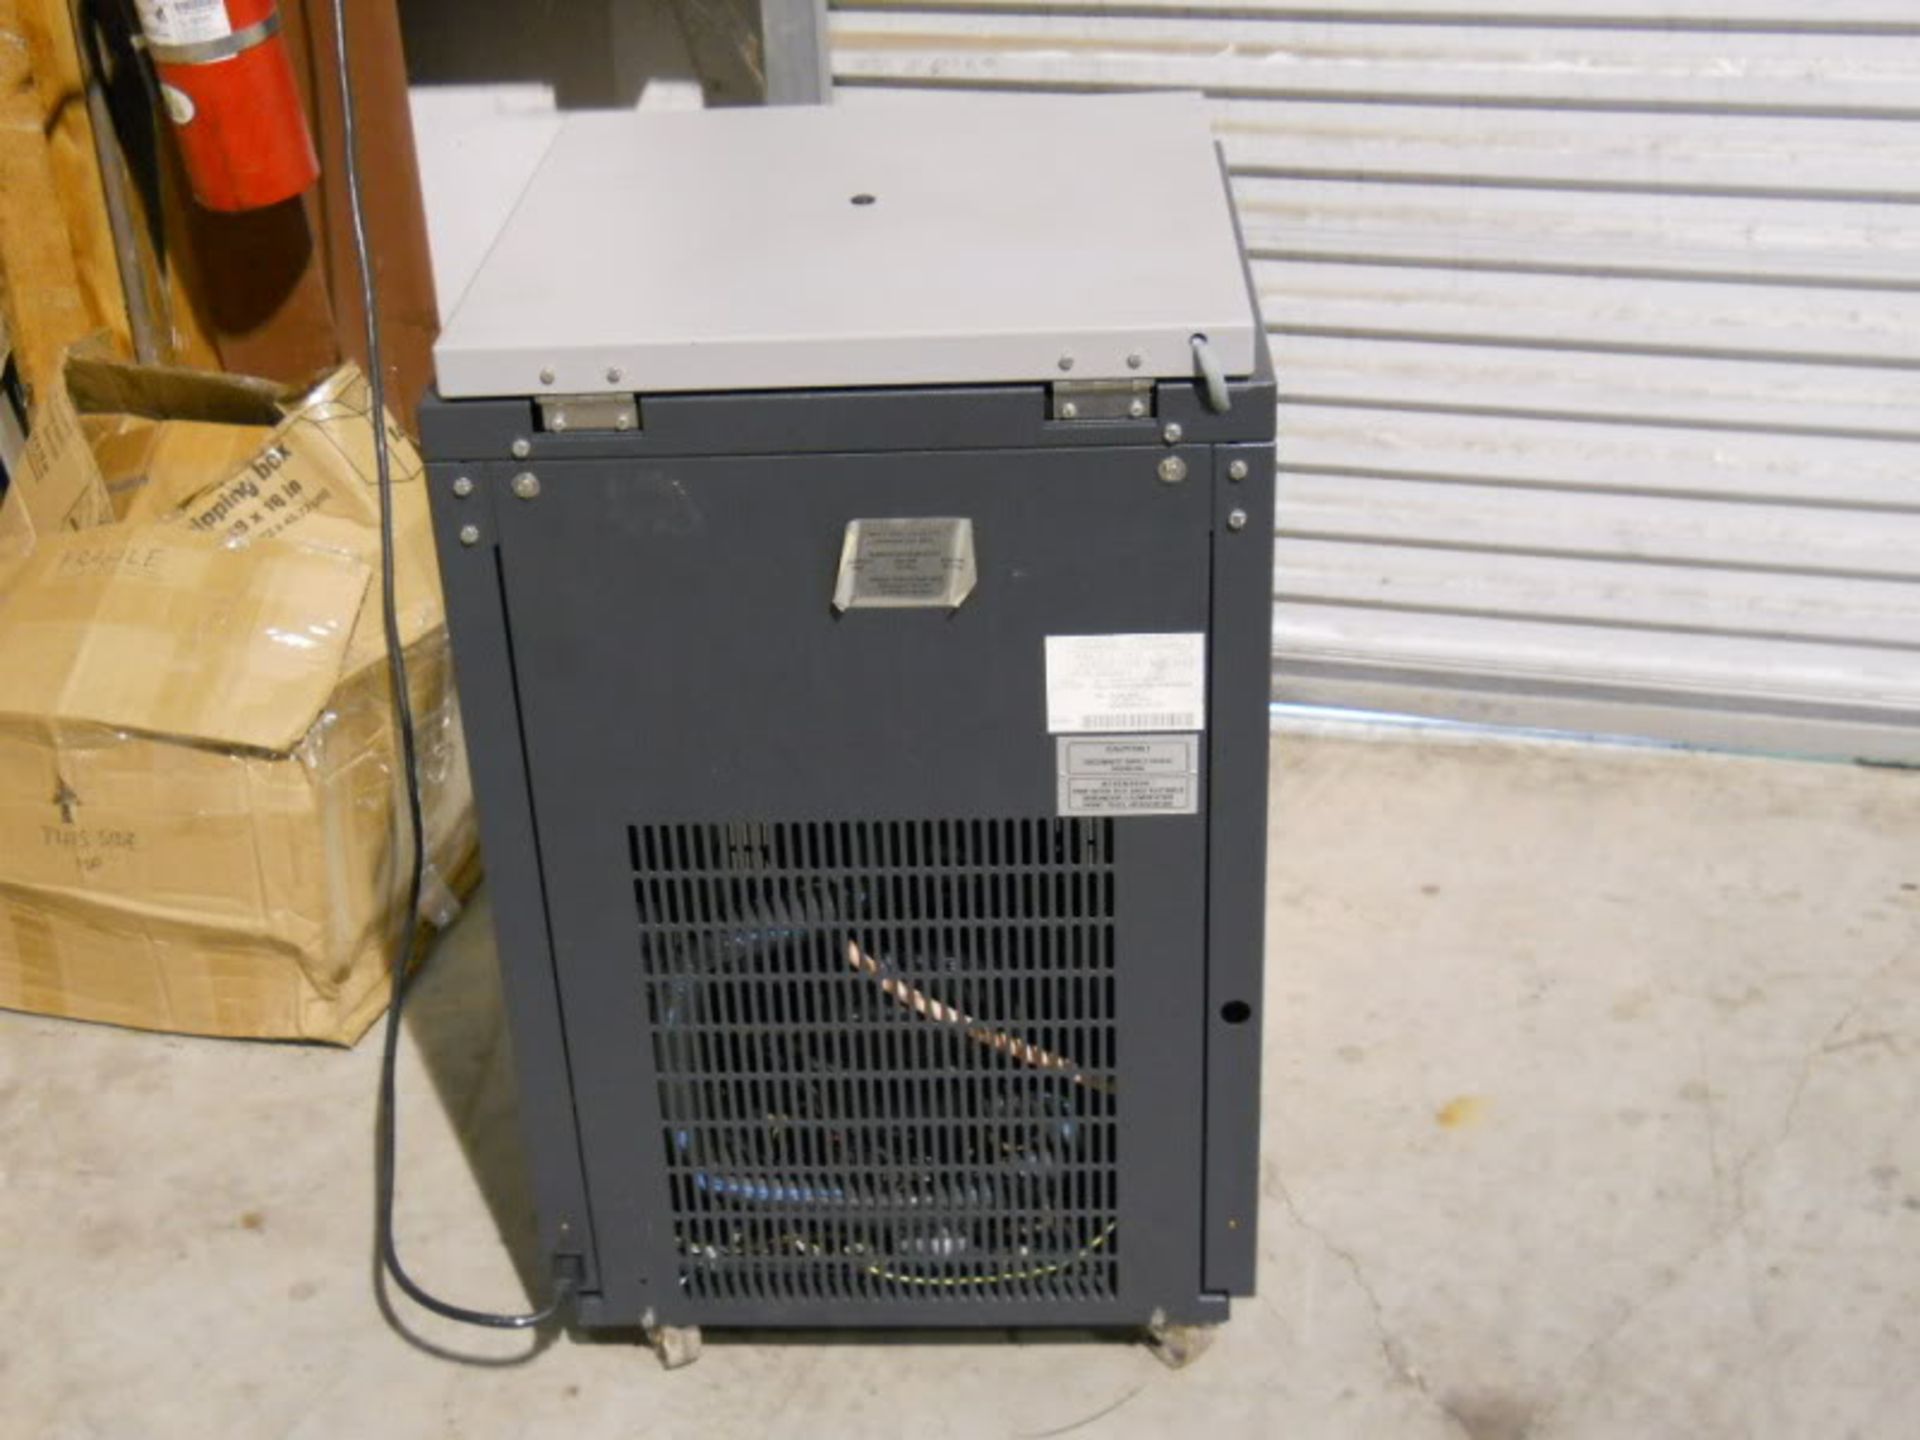 Jouan GT4-22 Refrigerated Centrifuge (Parts) Doesn't Get Cold, Qty 1, 221116409446 - Image 6 of 10